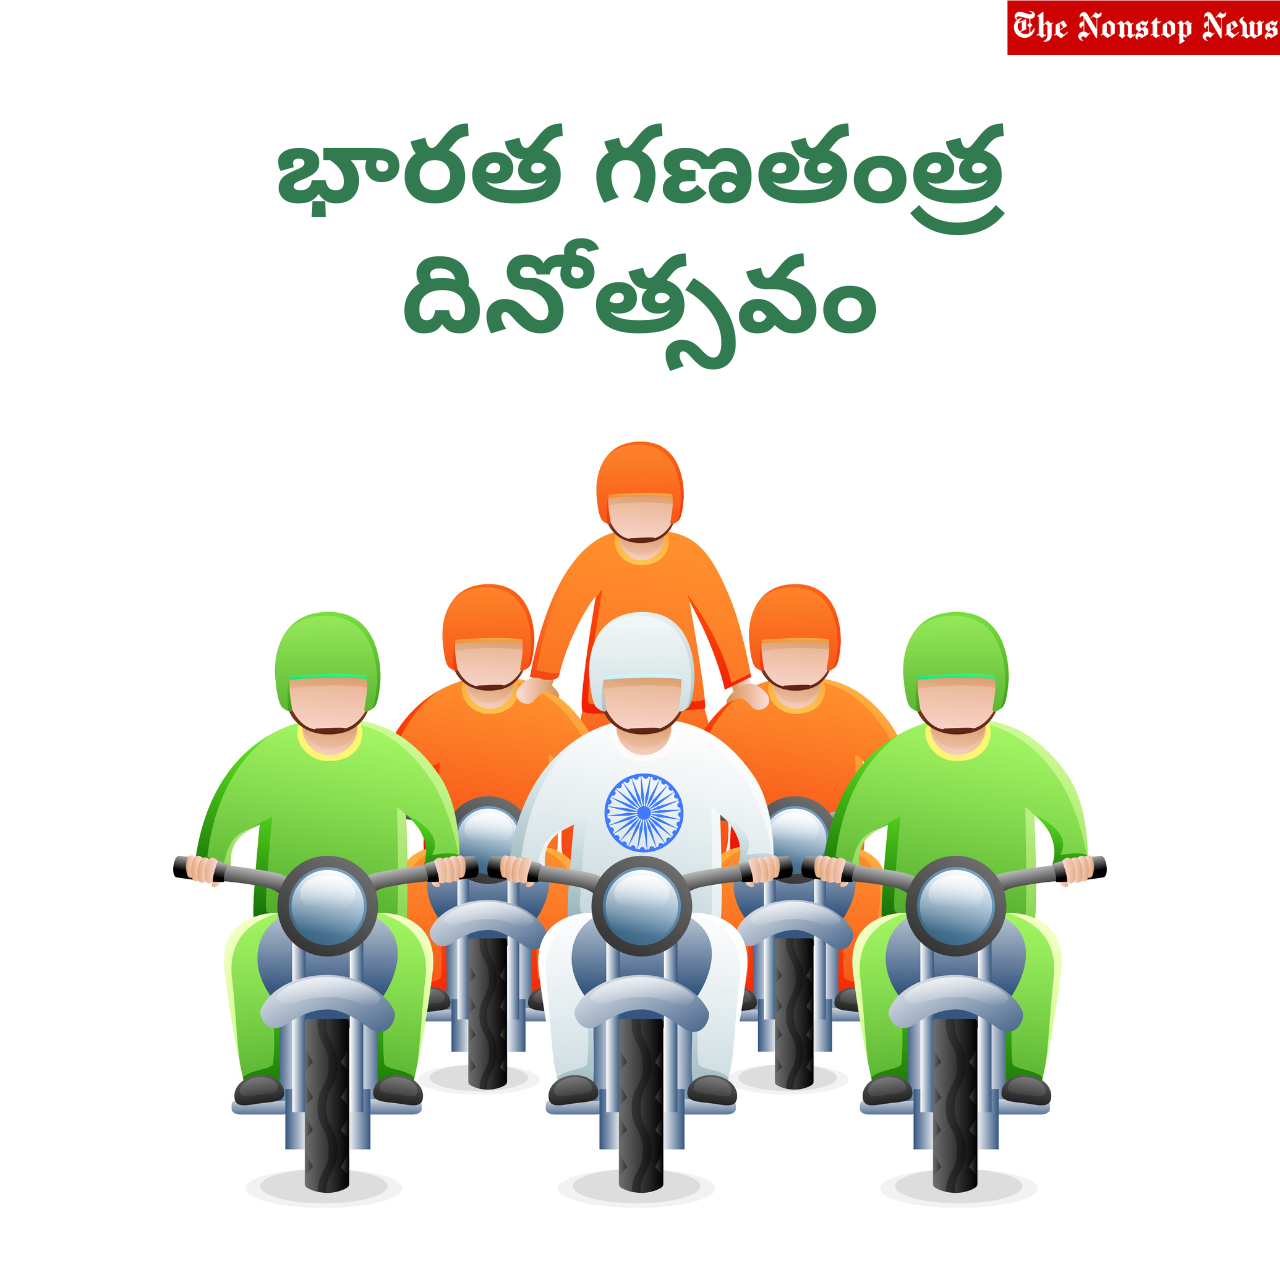 Indian Republic Day Sayings in Telugu, Slogans, Images, Messages, Greetings, Shayari, Wishes and Quotes